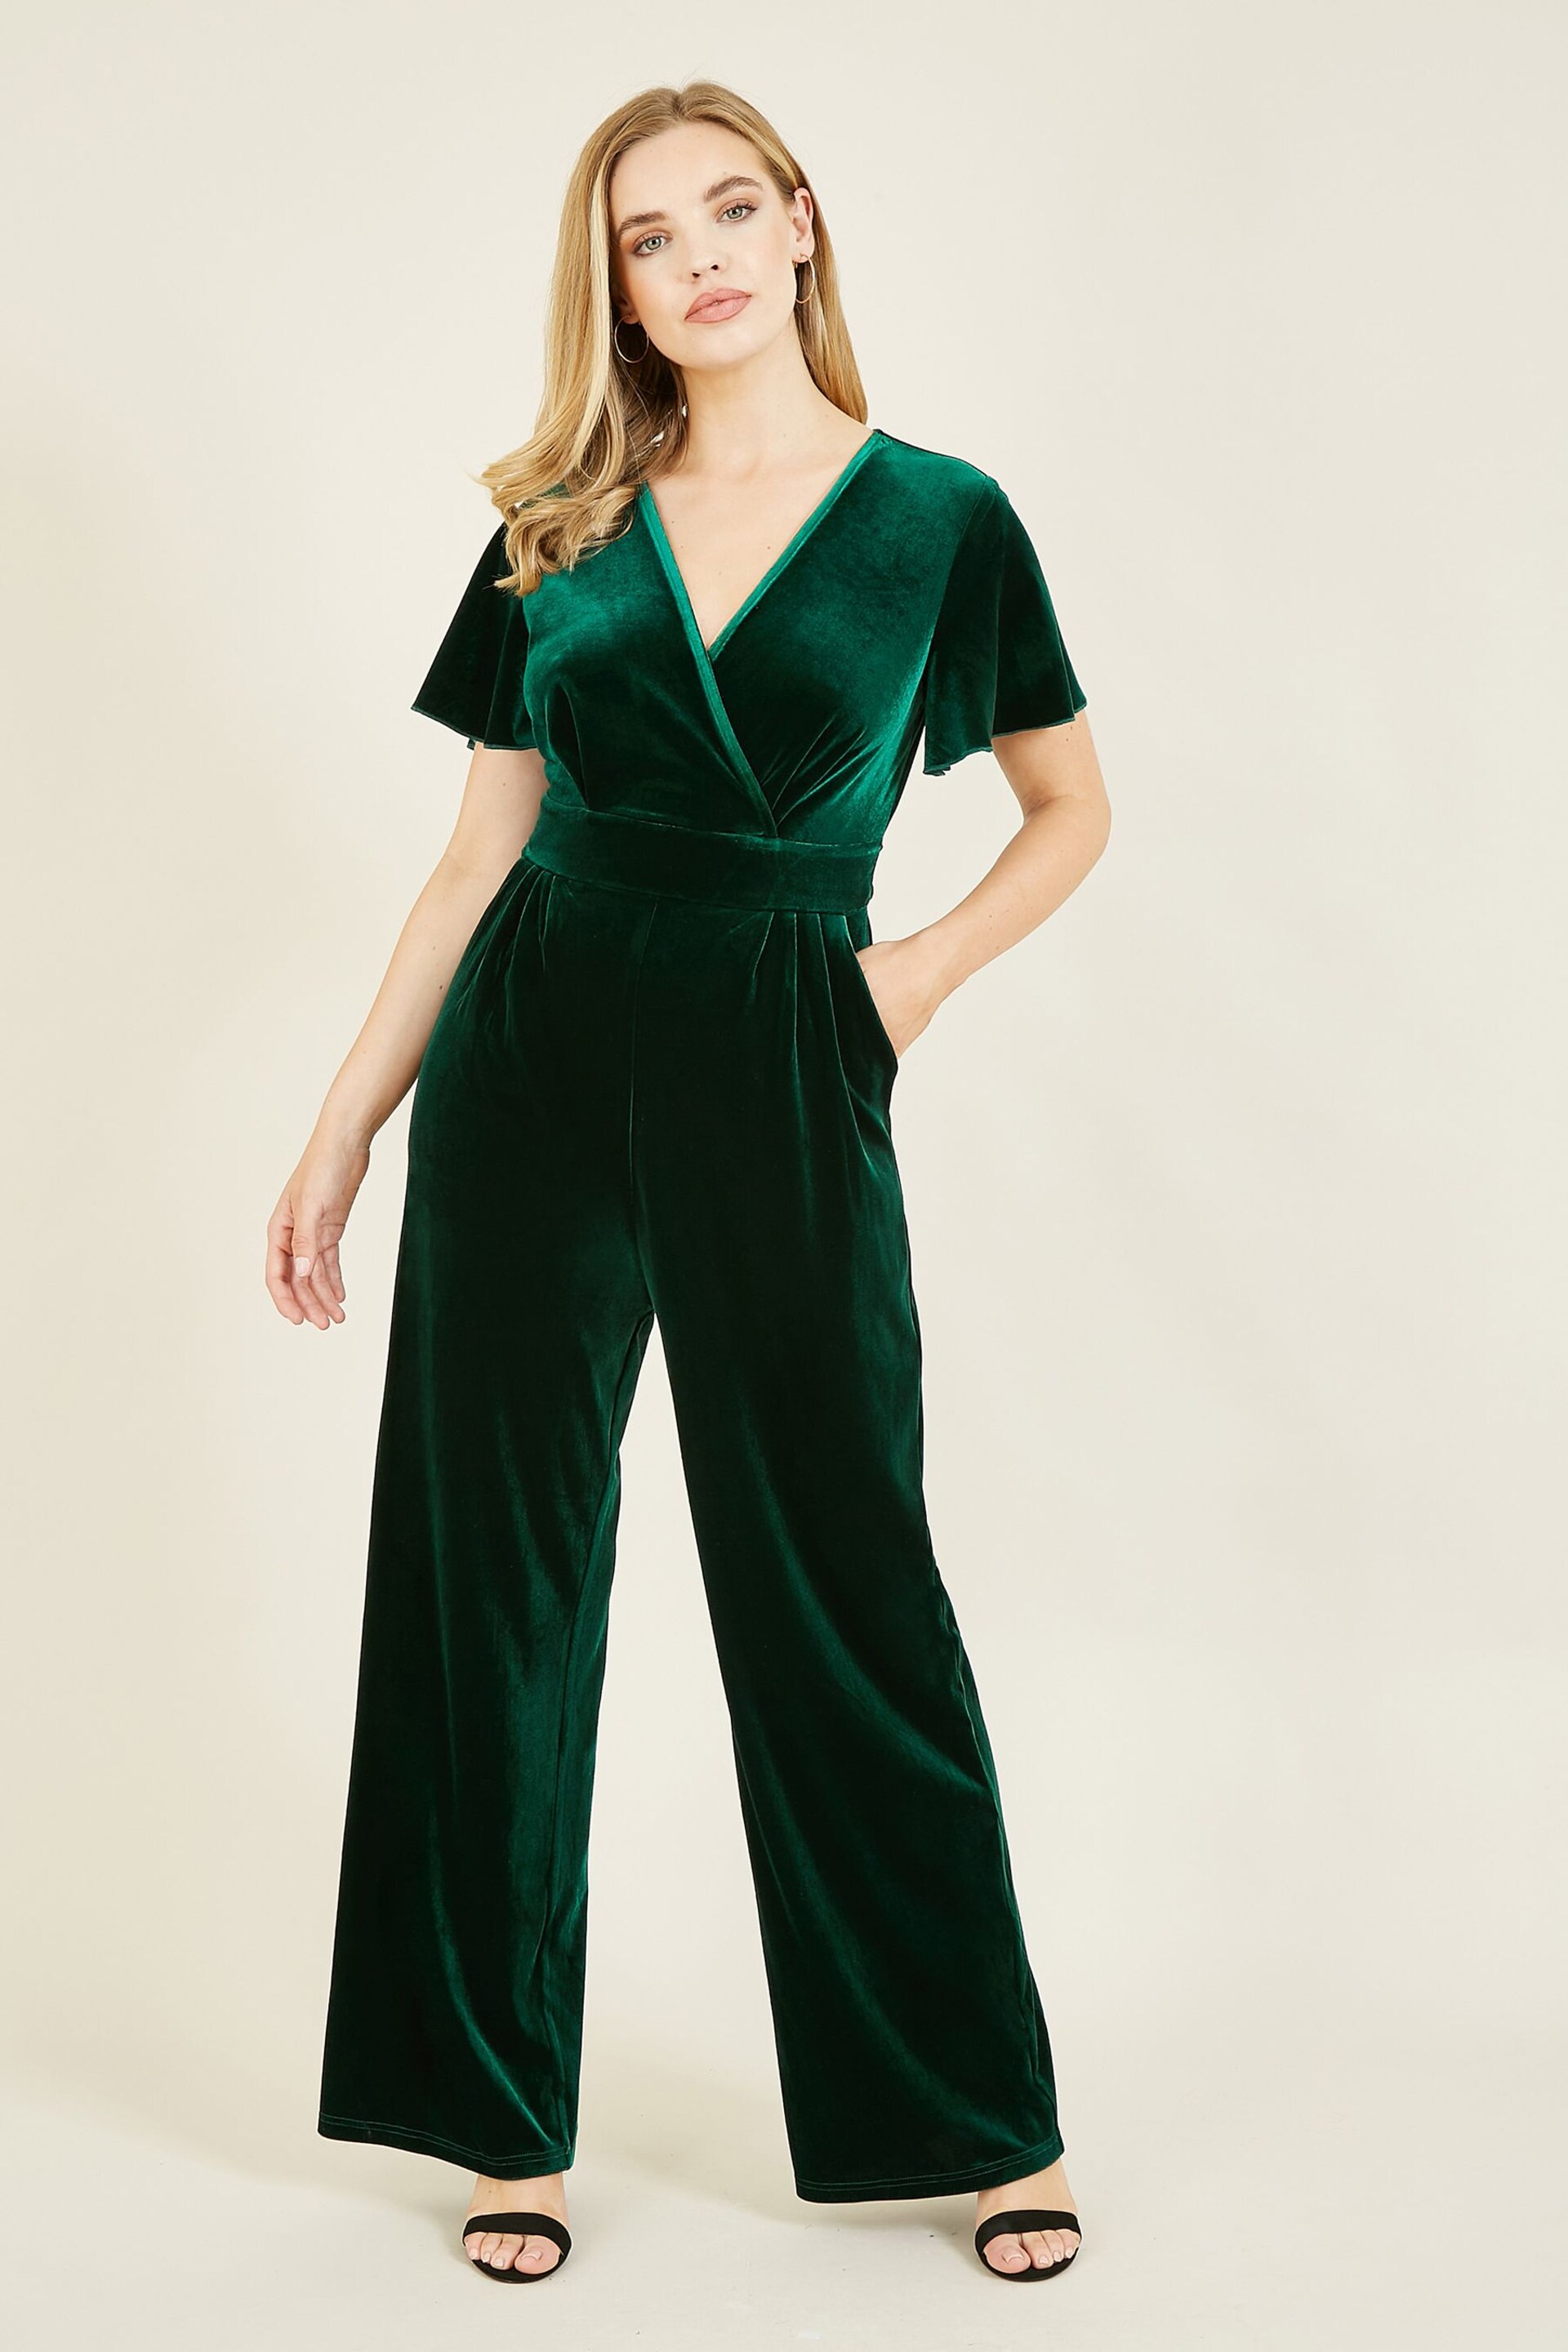 Yumi Dark Green Jumpsuit With Angel Sleeves - Image 1 of 2